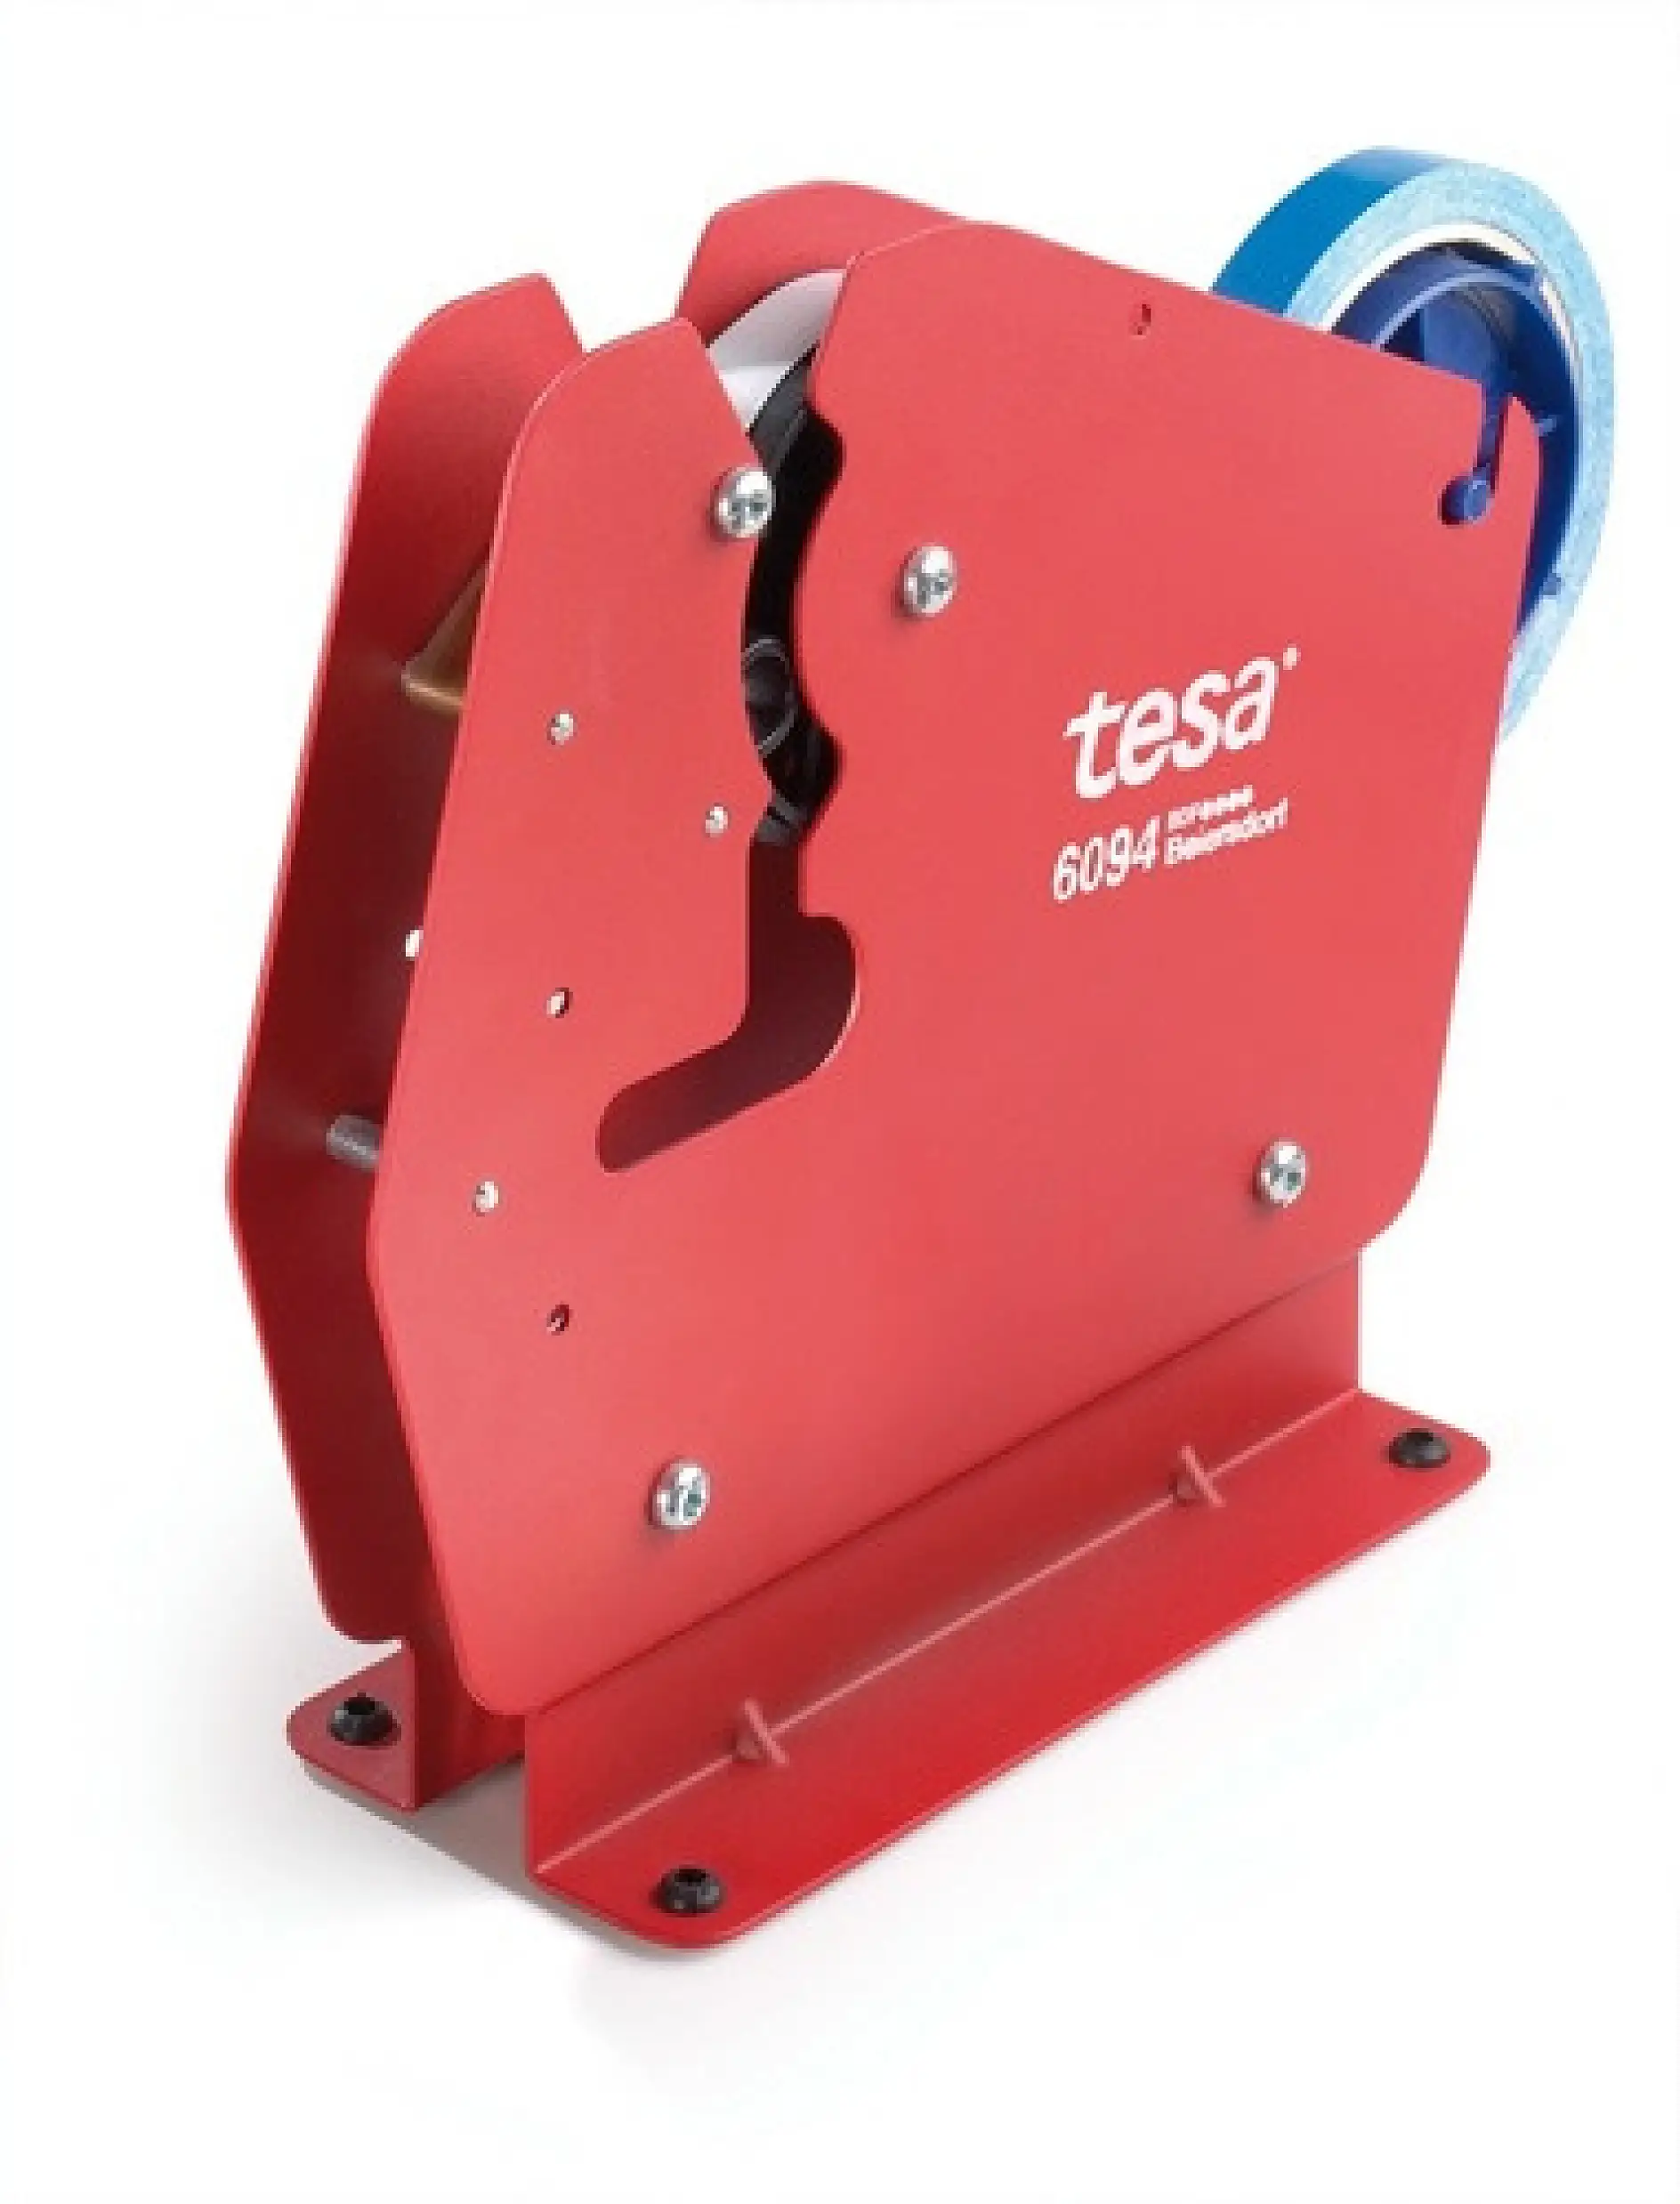 The tesa bag sealing dispenser 4204 is developed for the quick and effective use of sealing any plastic or paper bag